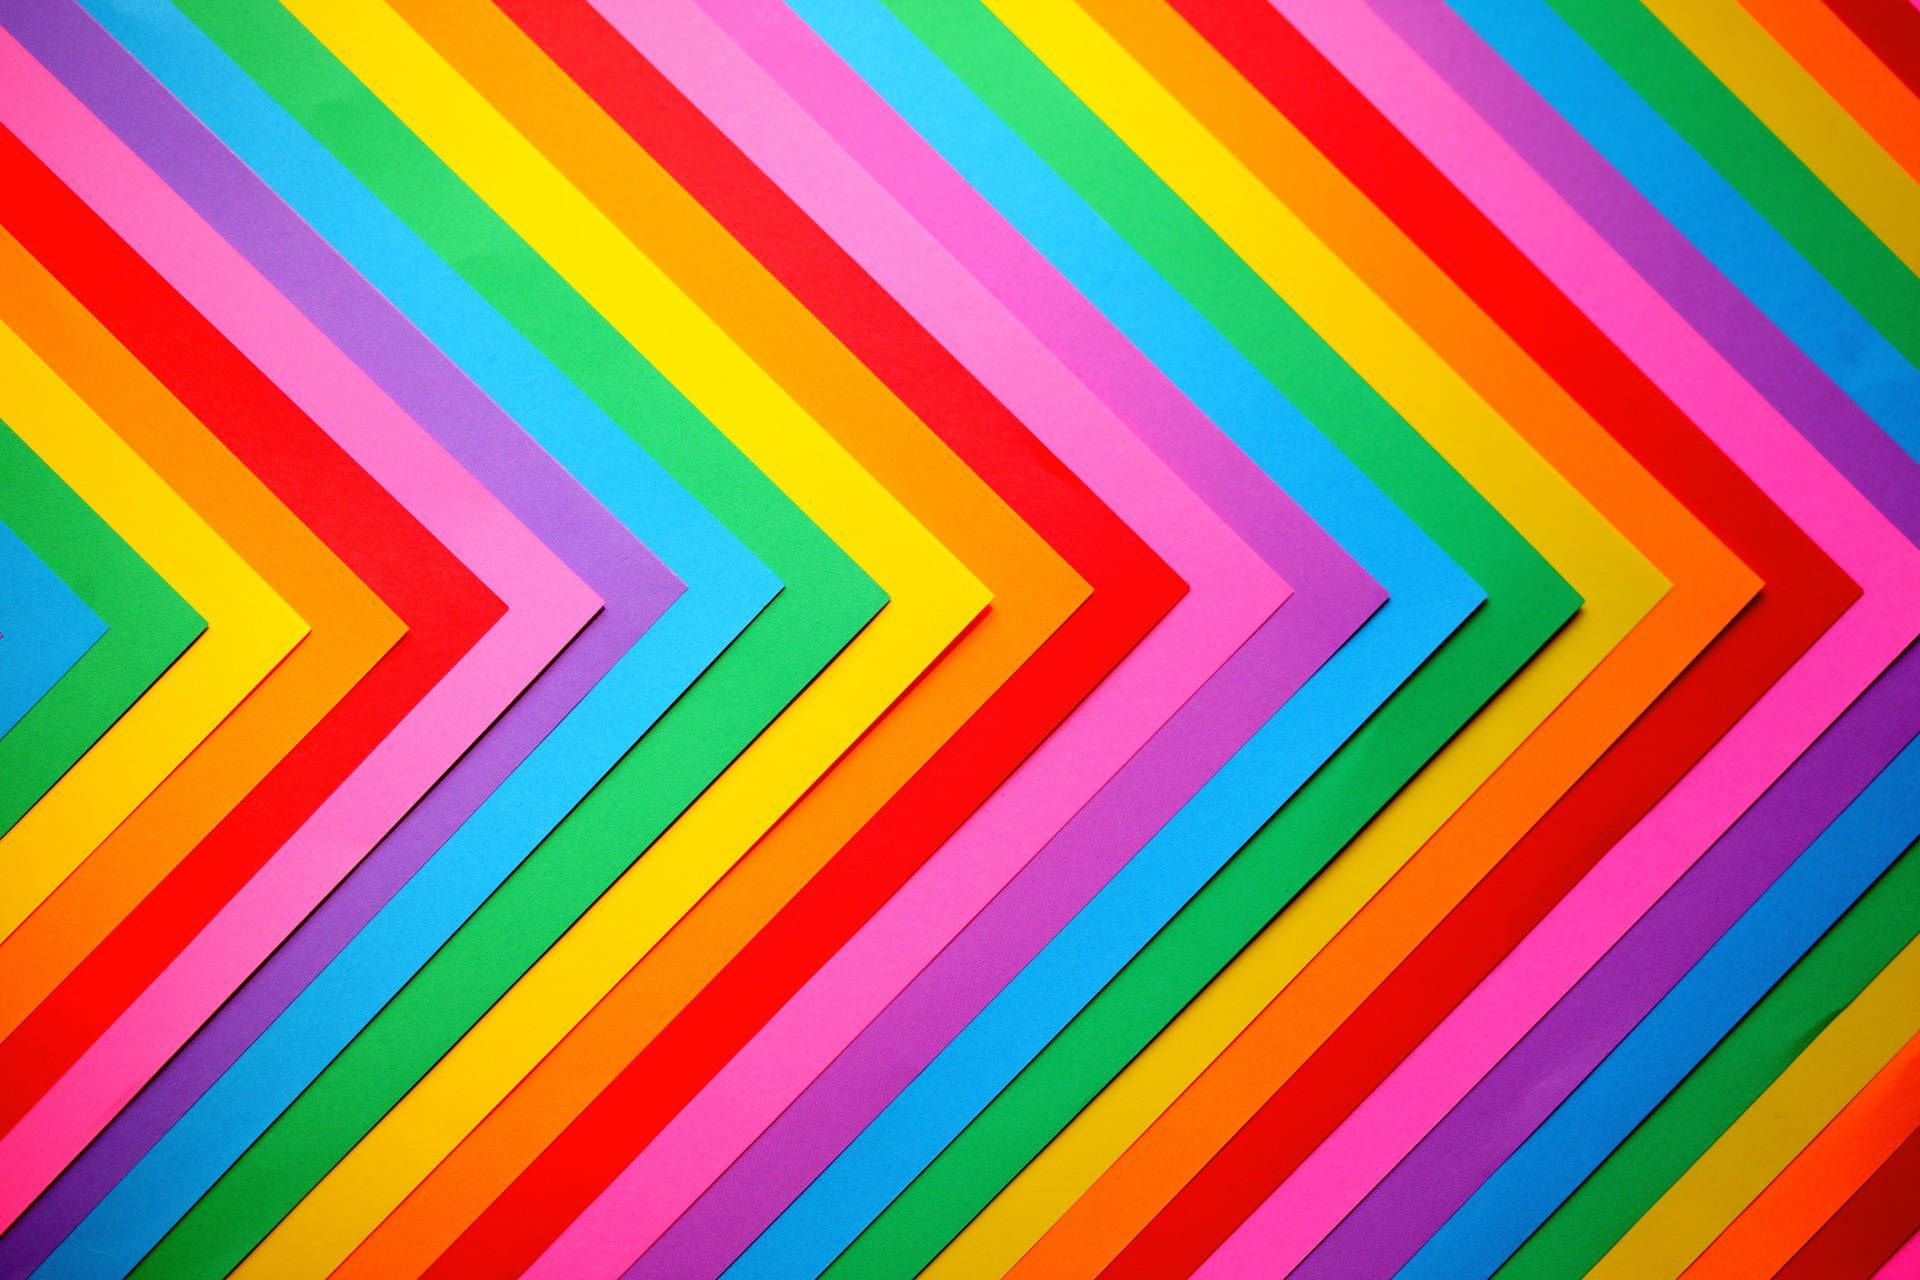 A colorful rainbow pattern on the wall - Pattern